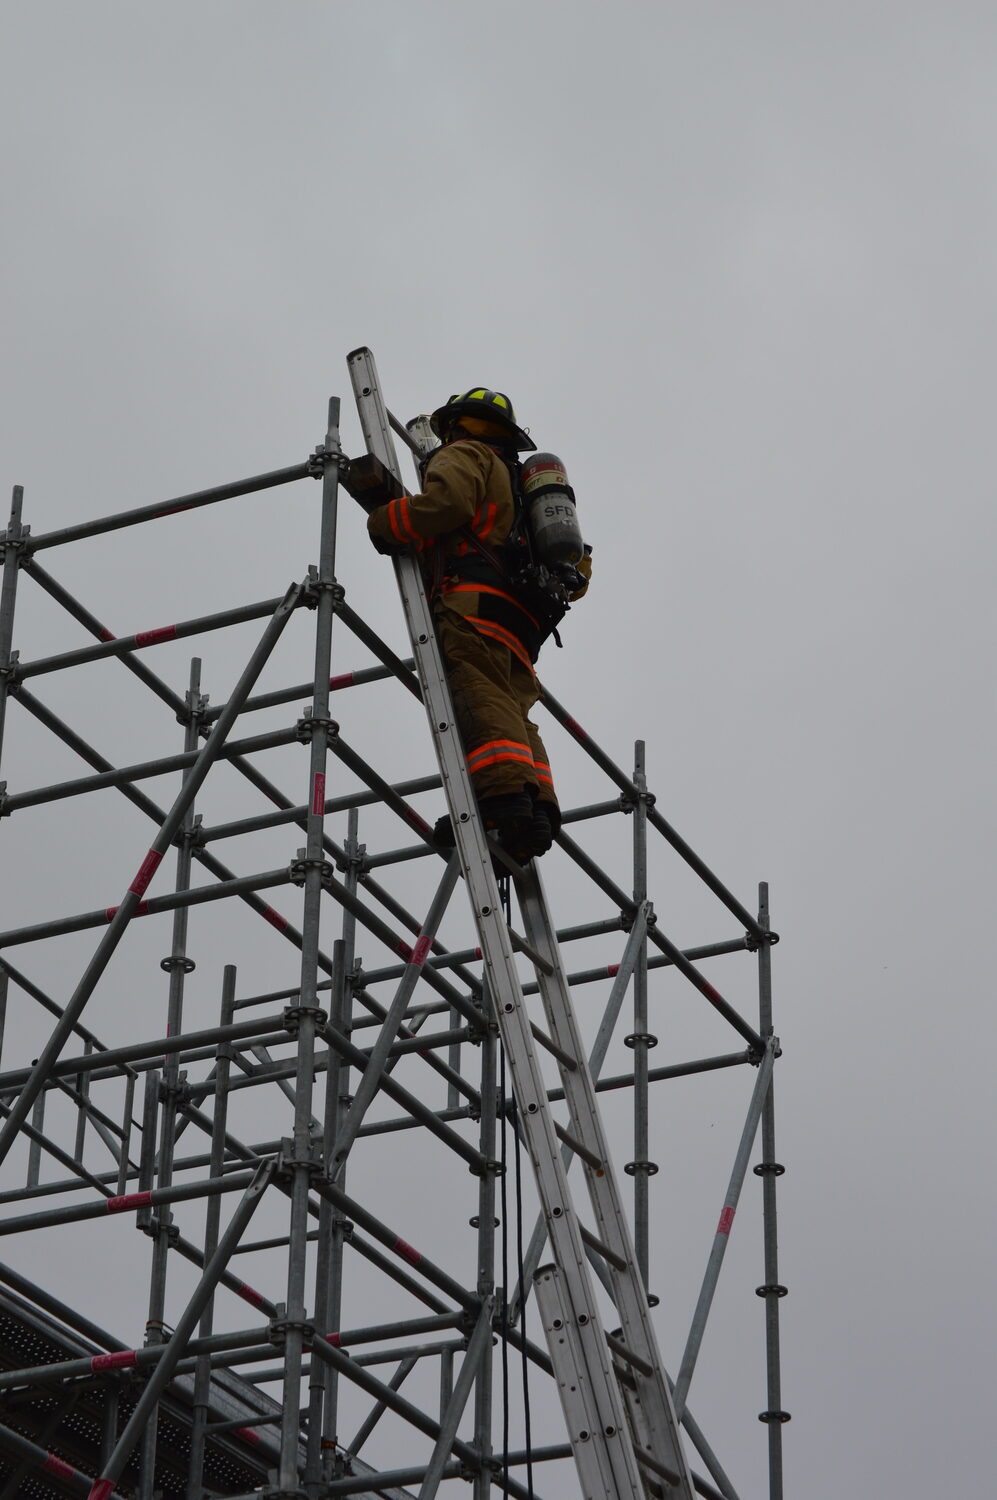 Trainees have to reach the top of the 30' foot ladder to graduate. TOM GOGOLA